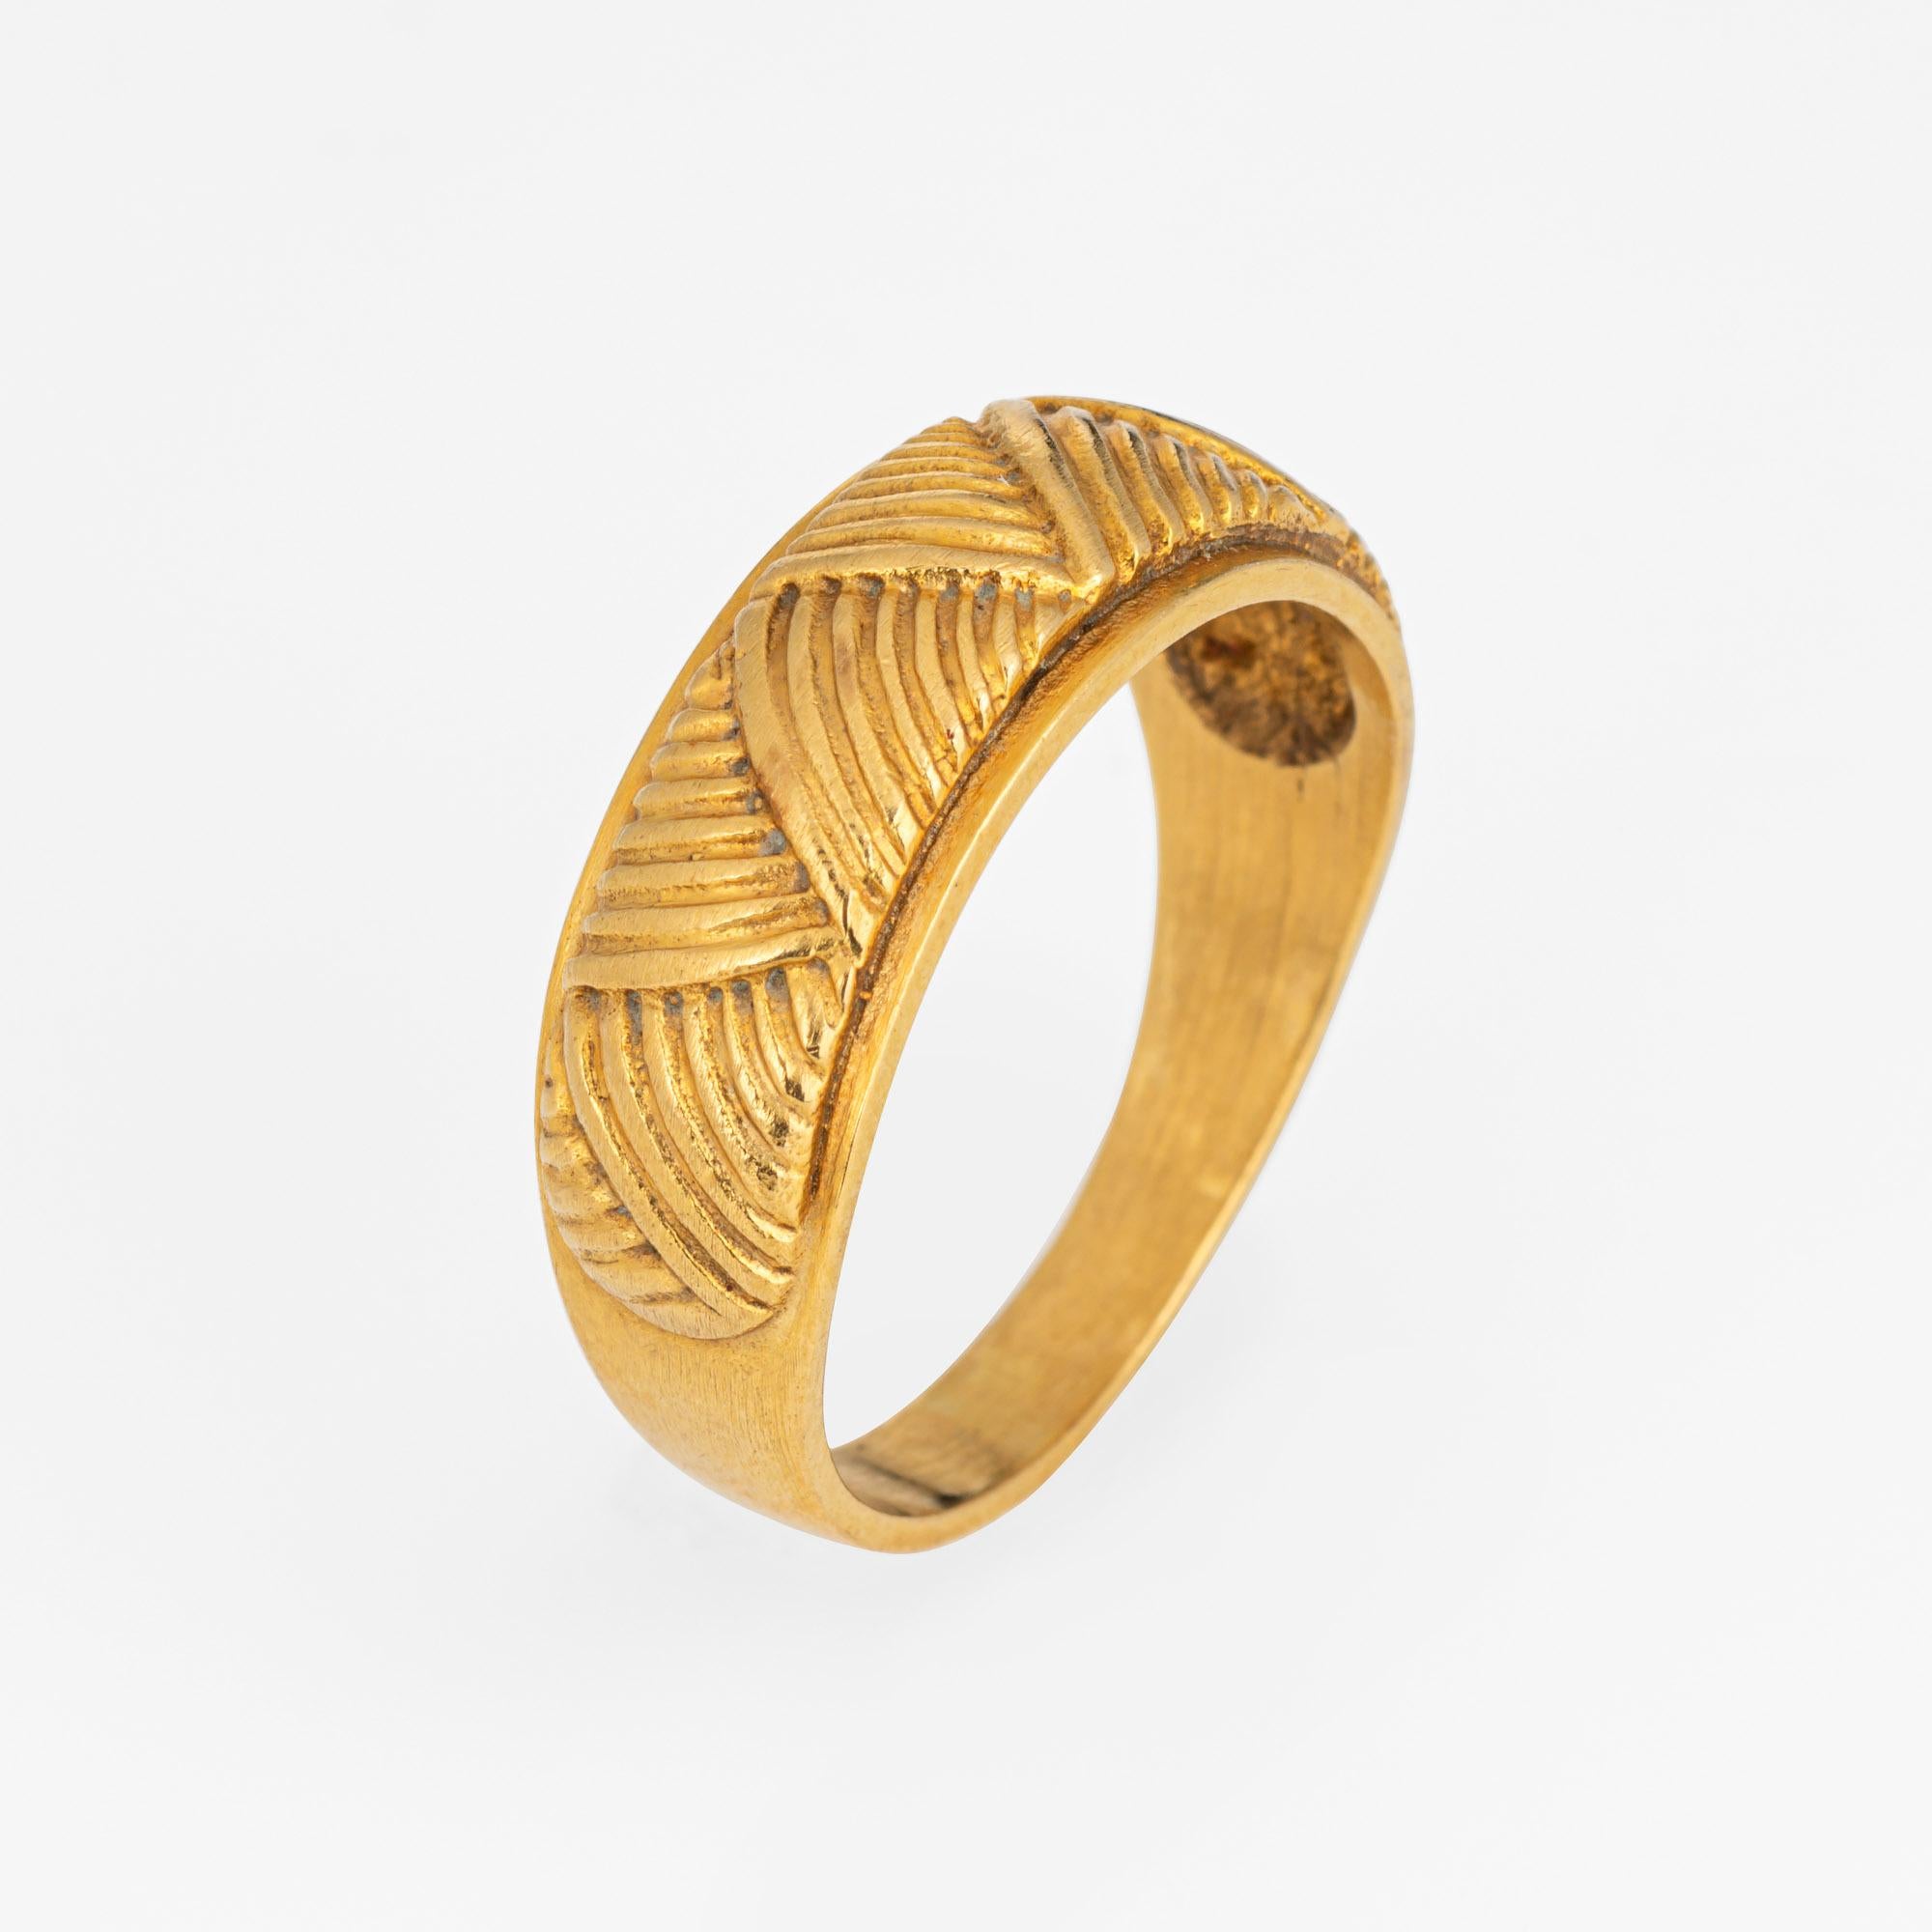 Finely detailed vintage Lalaounis ring crafted in 18k yellow gold (circa 1990s). 

Lalaounis is a famed Greek jewelry company known for themes including science, nature, mosaics, astronomy and medicine. The ring highlights bright buttery 18k gold,